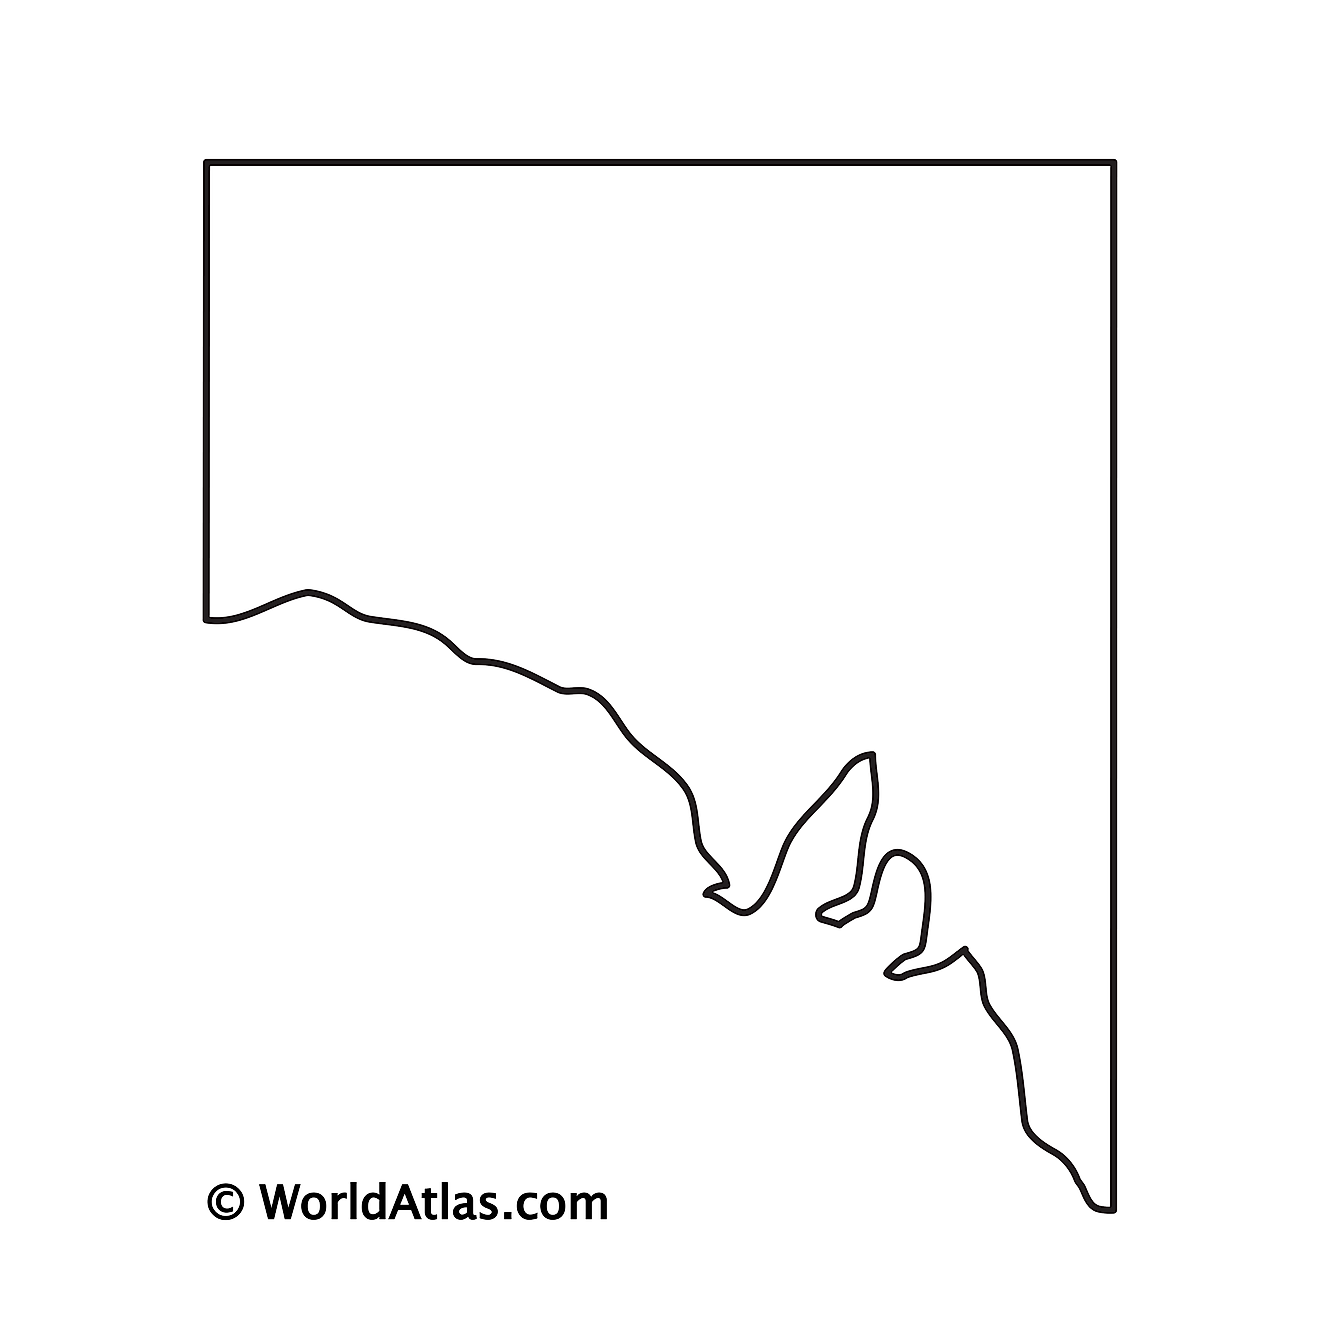 Blank Outline Map of South Australia